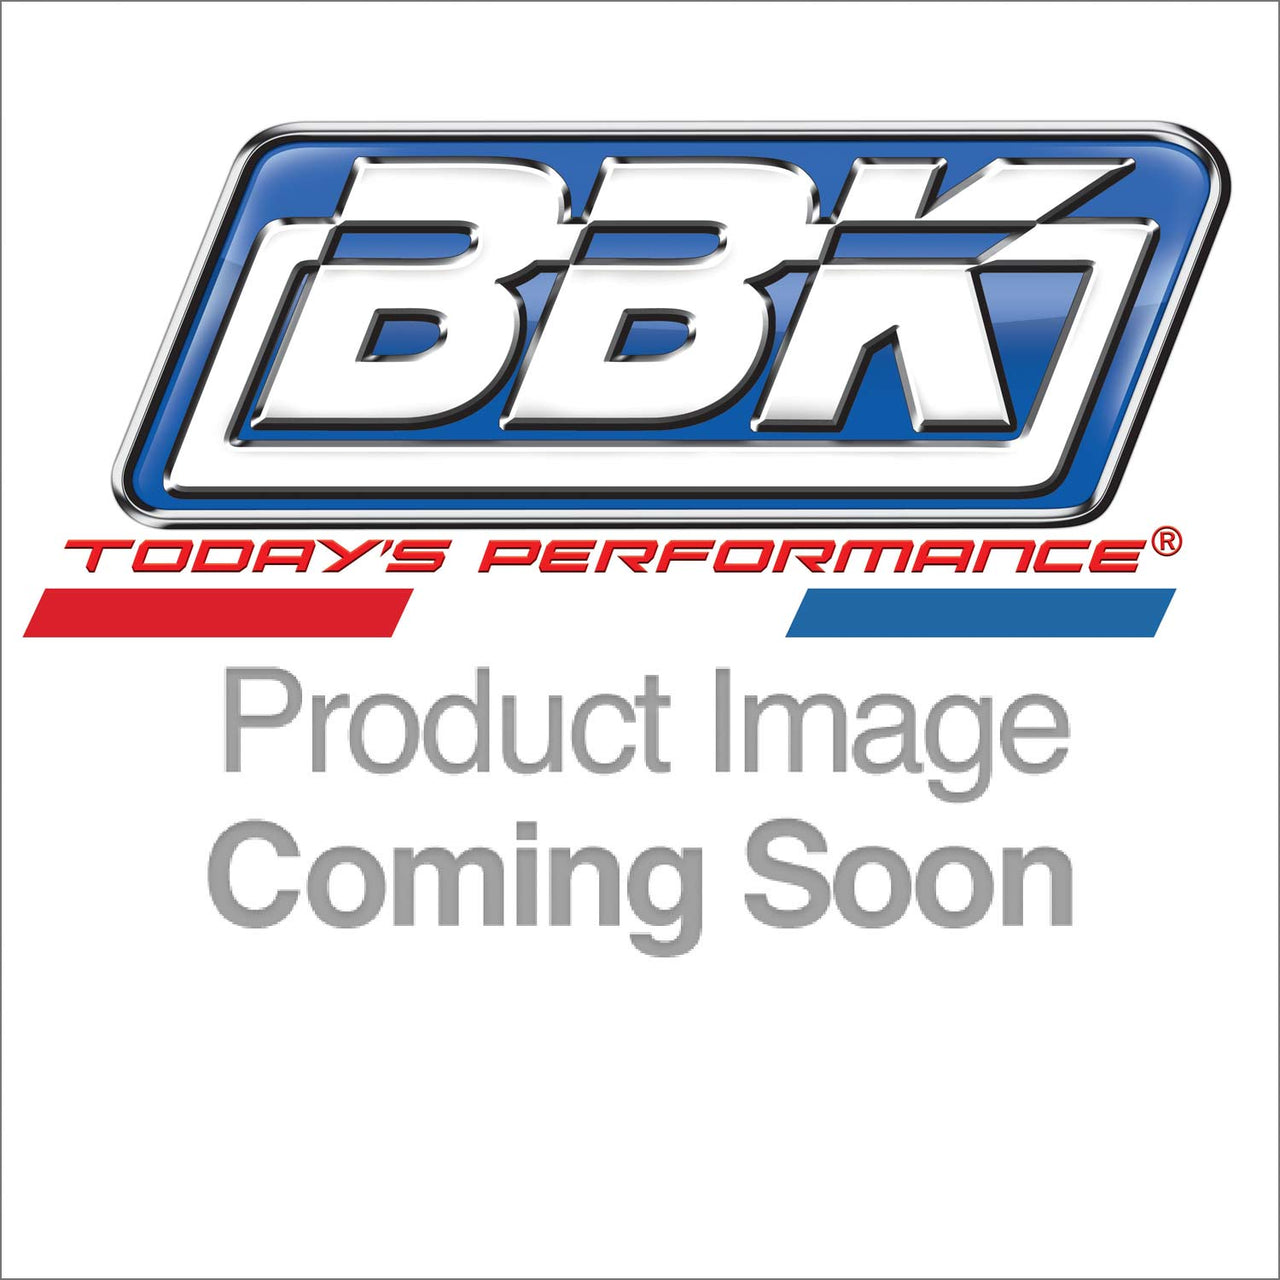 2007-2011 Jeep Wrangler 3.8L WIRE HARNESS EXTENSION (1pc) 24" FOR BBK LONG TUBES 4050/40500